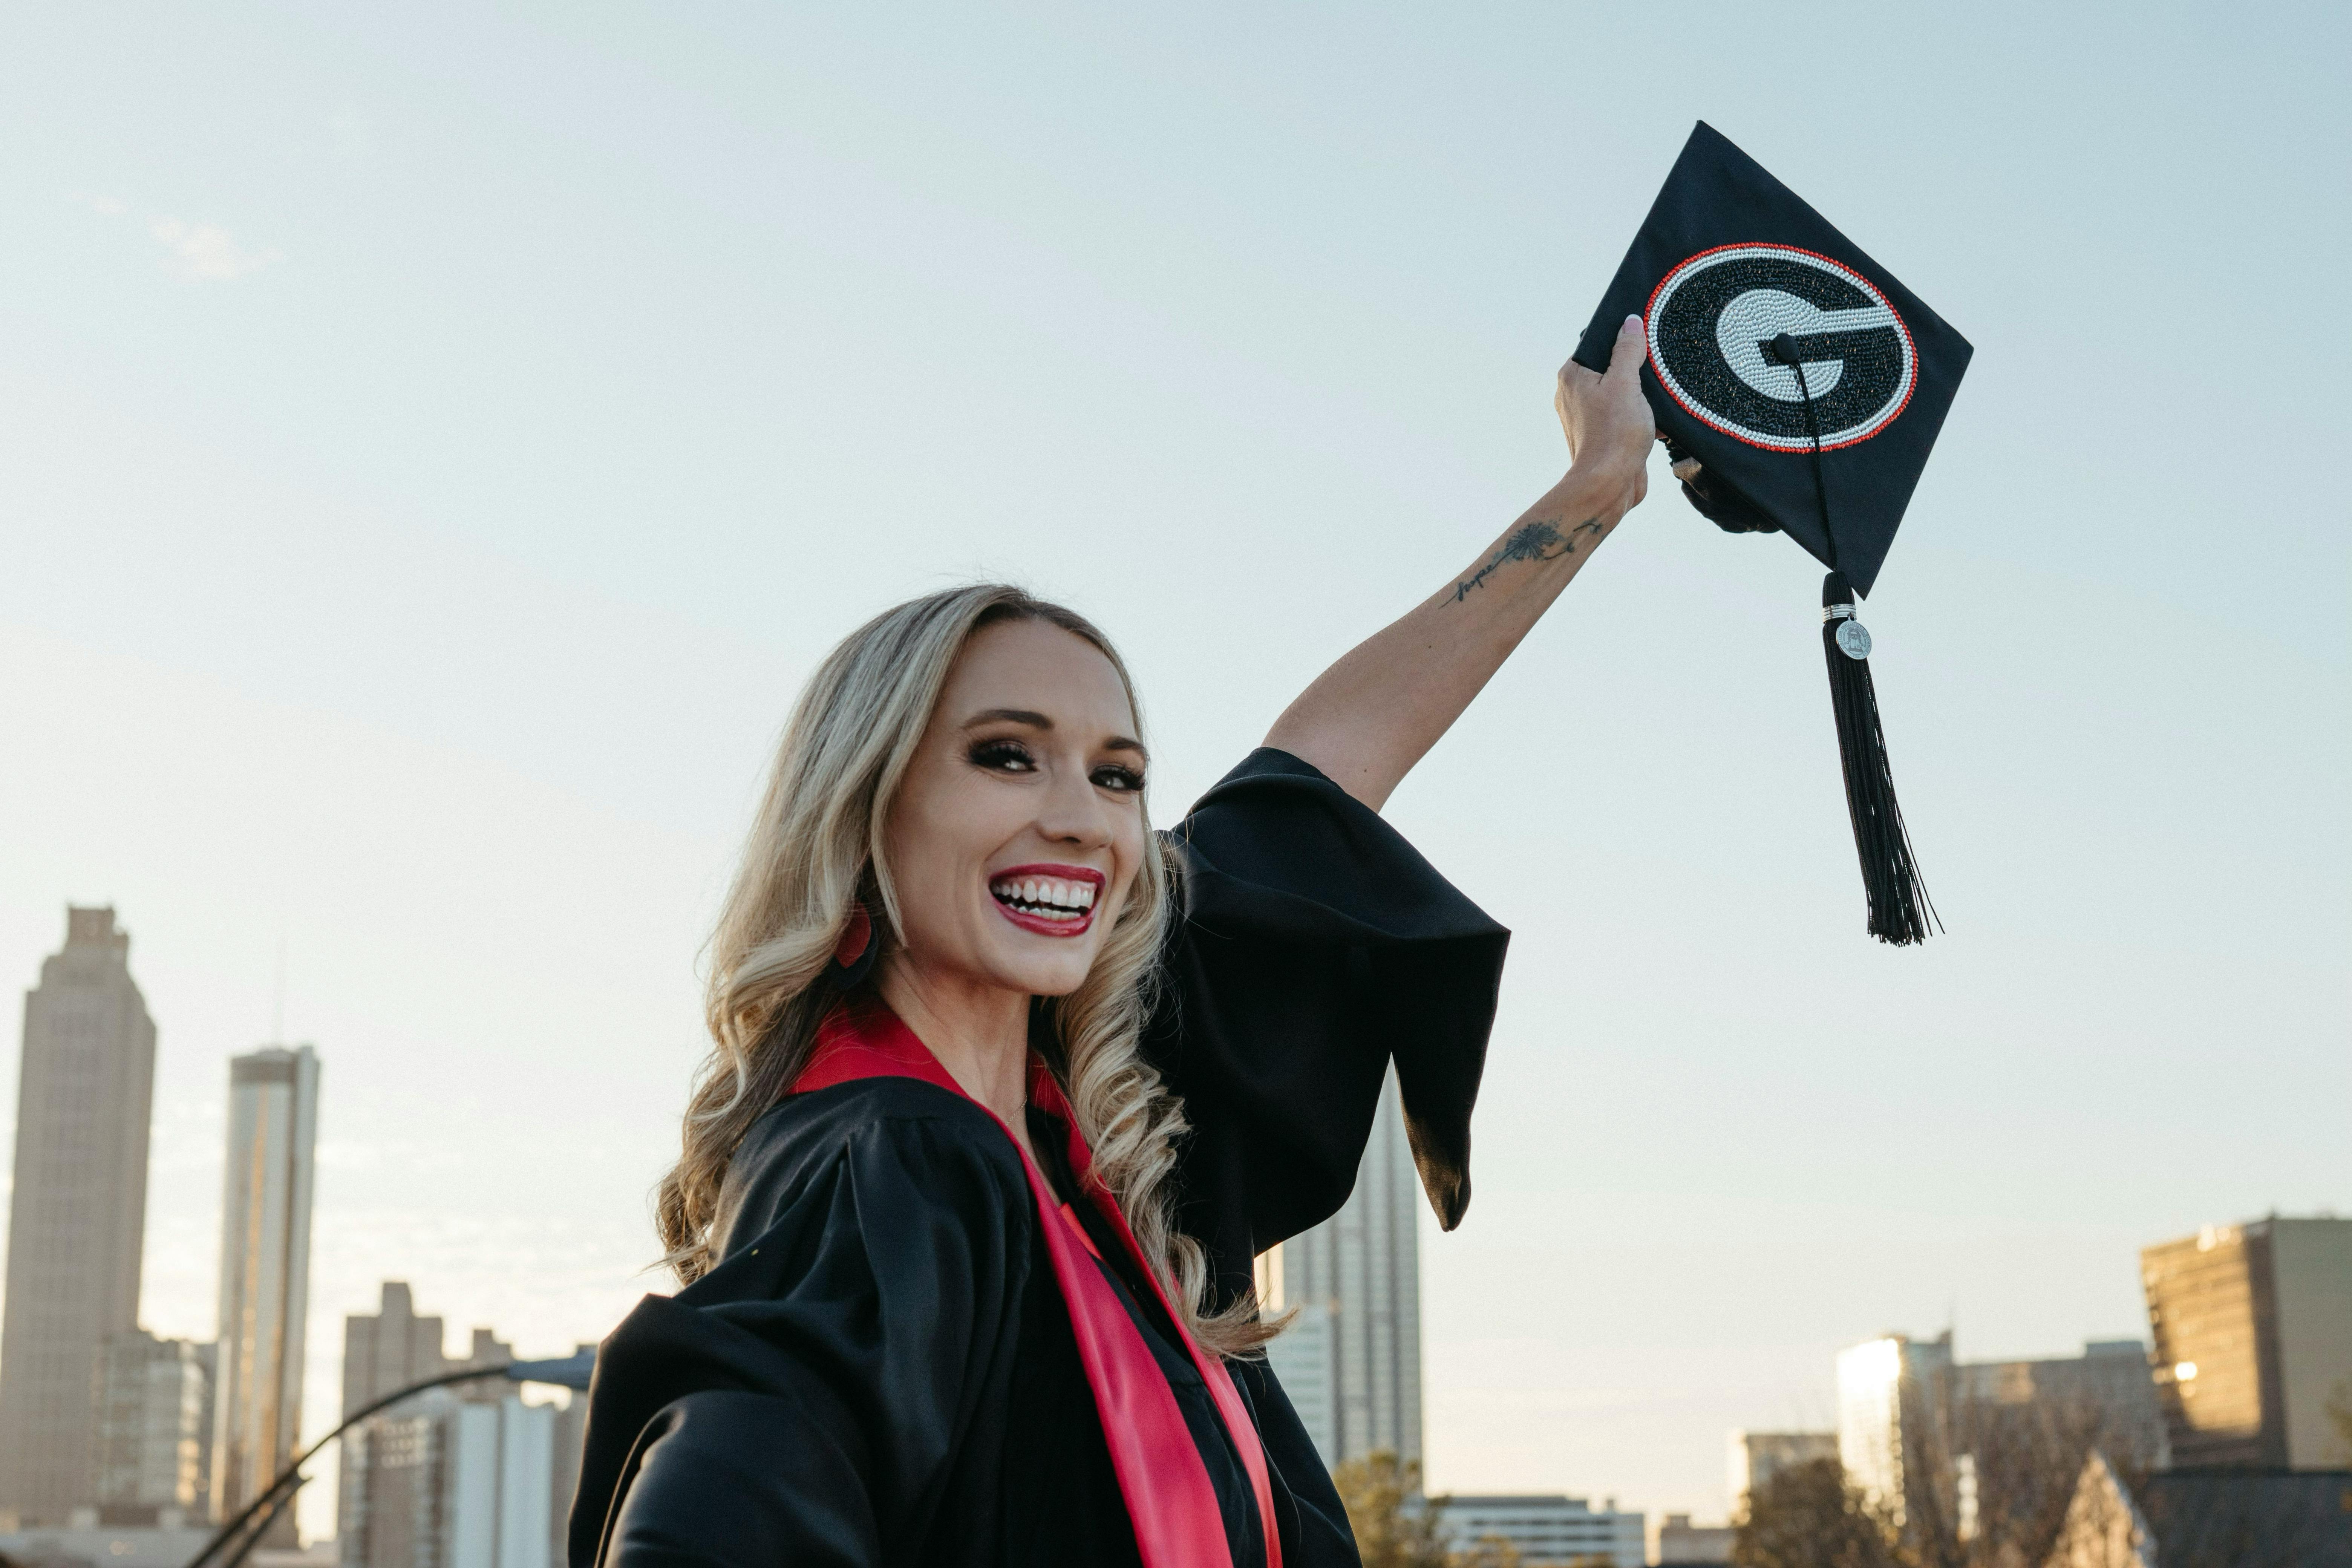 Woman wearing graduation robes and holding her graduation cap